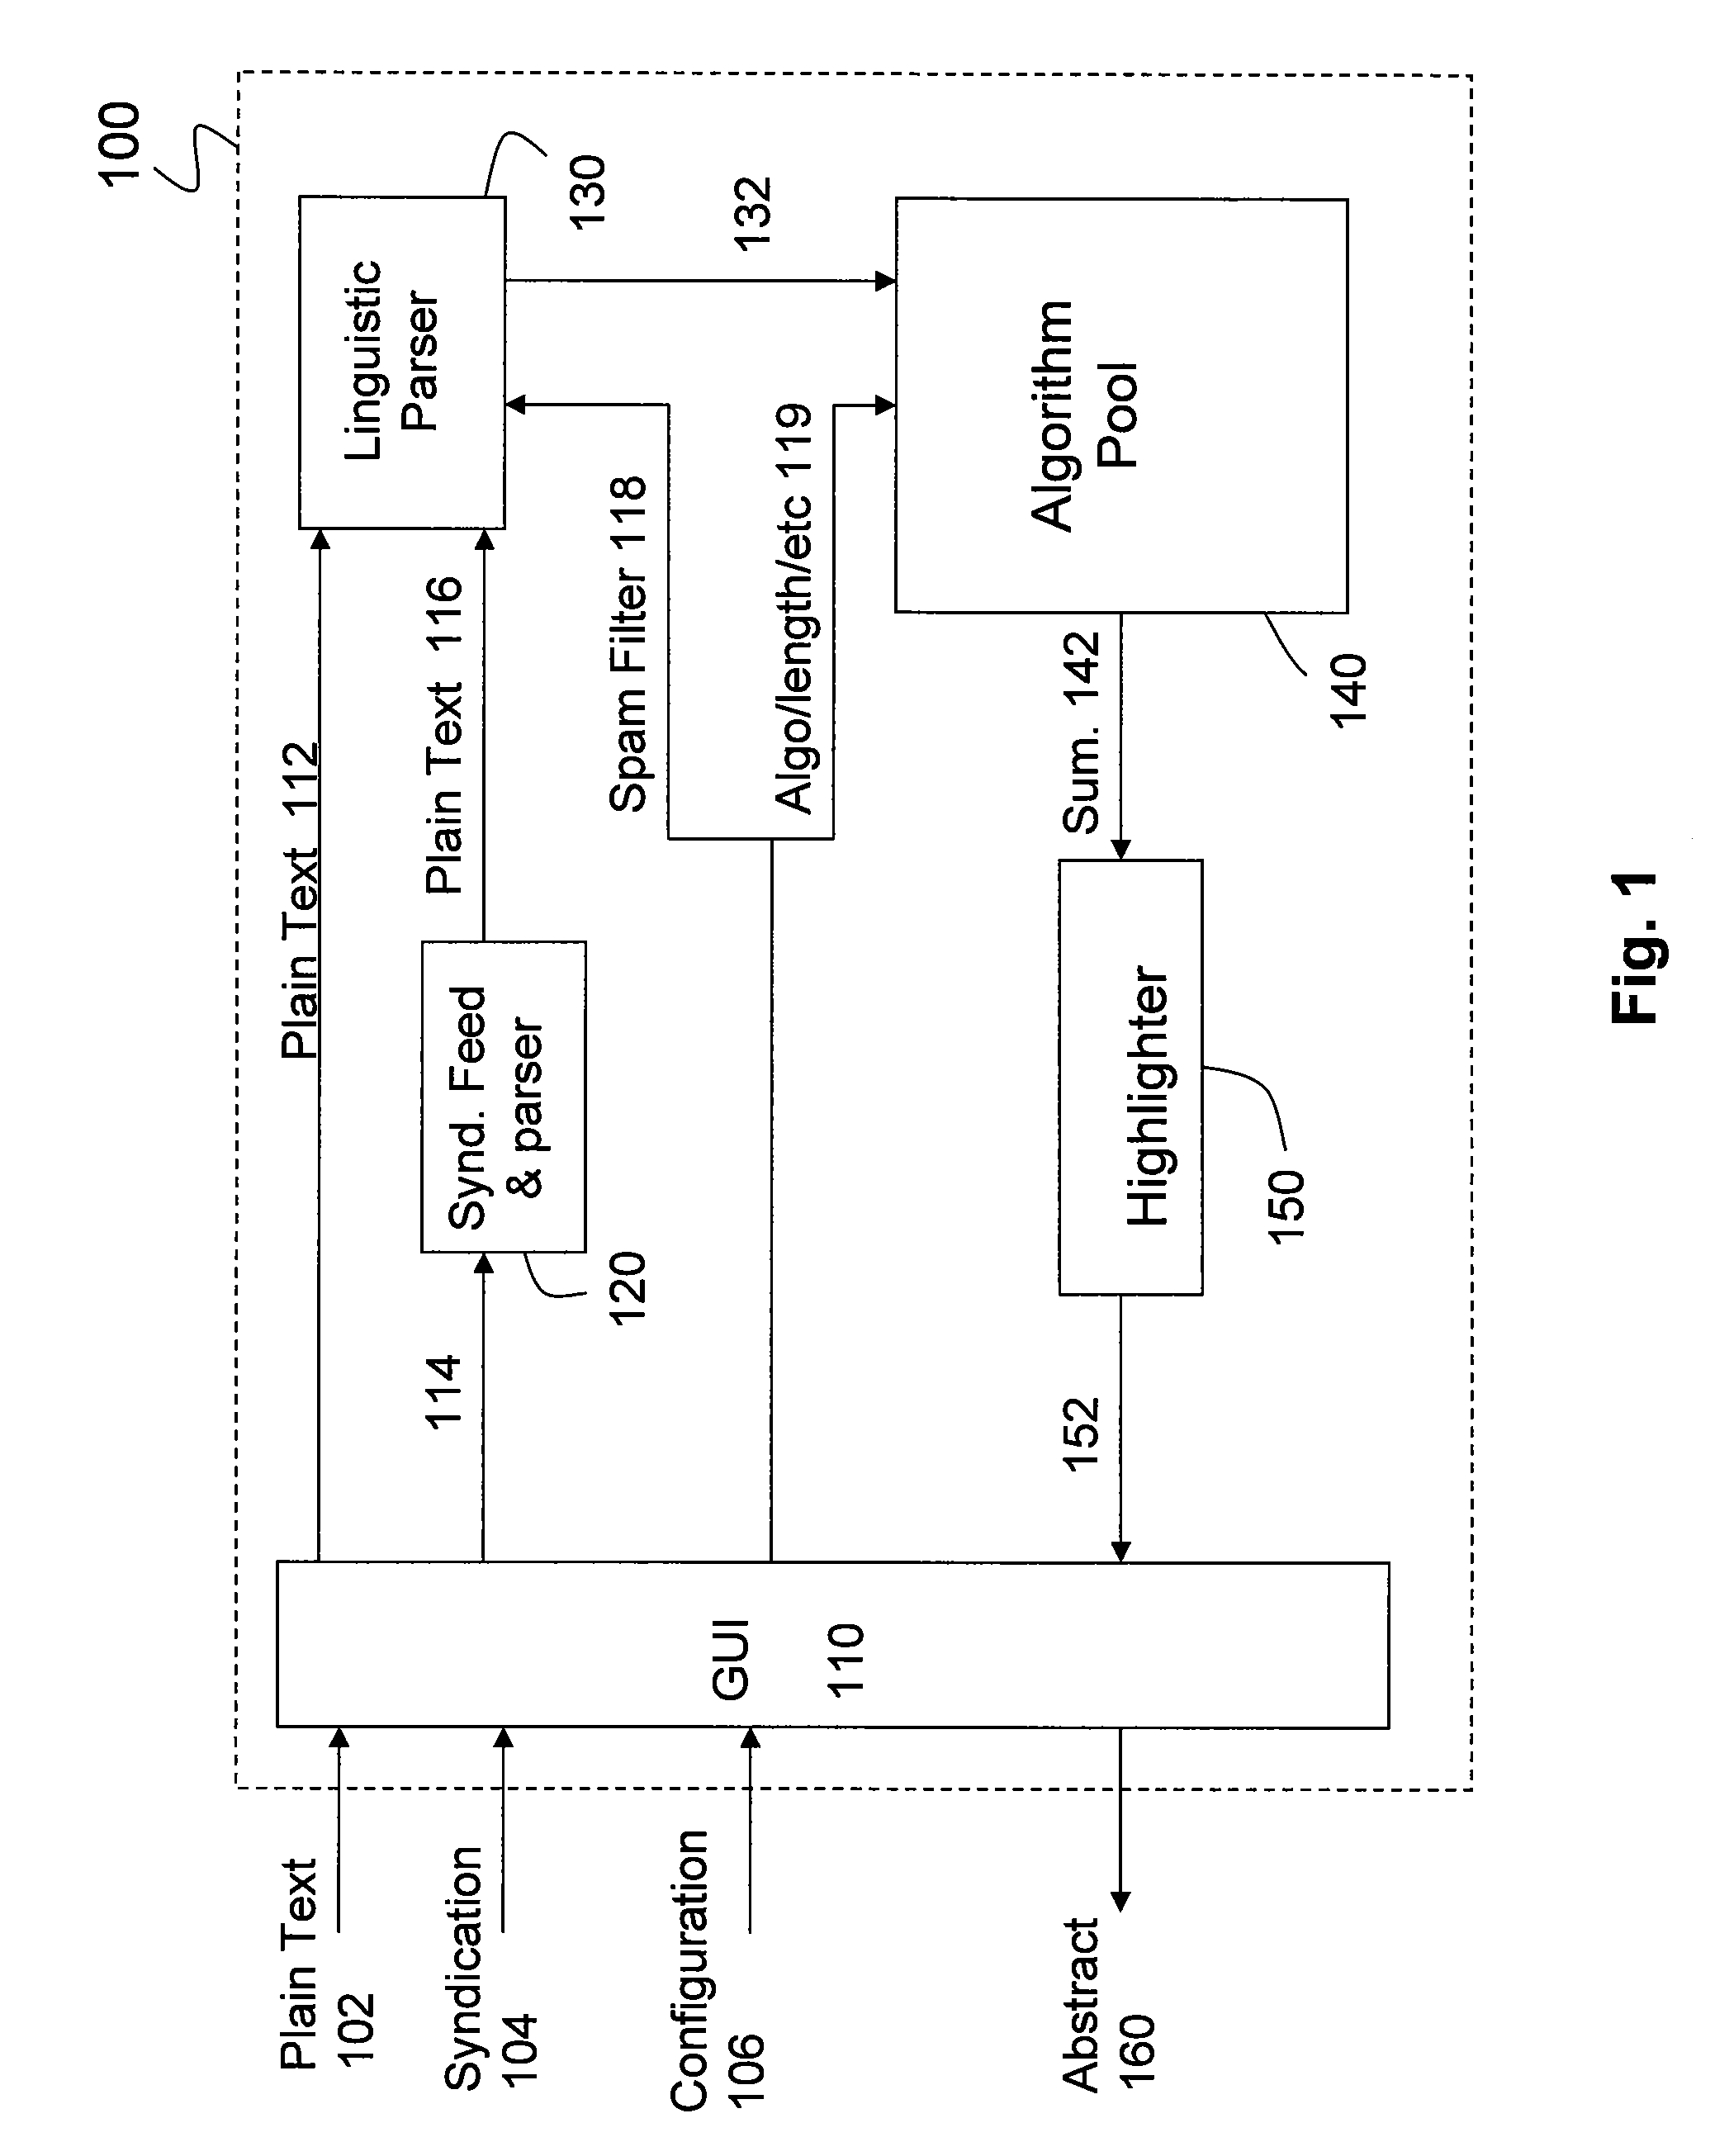 Method and apparatus for highlighting diverse aspects in a document